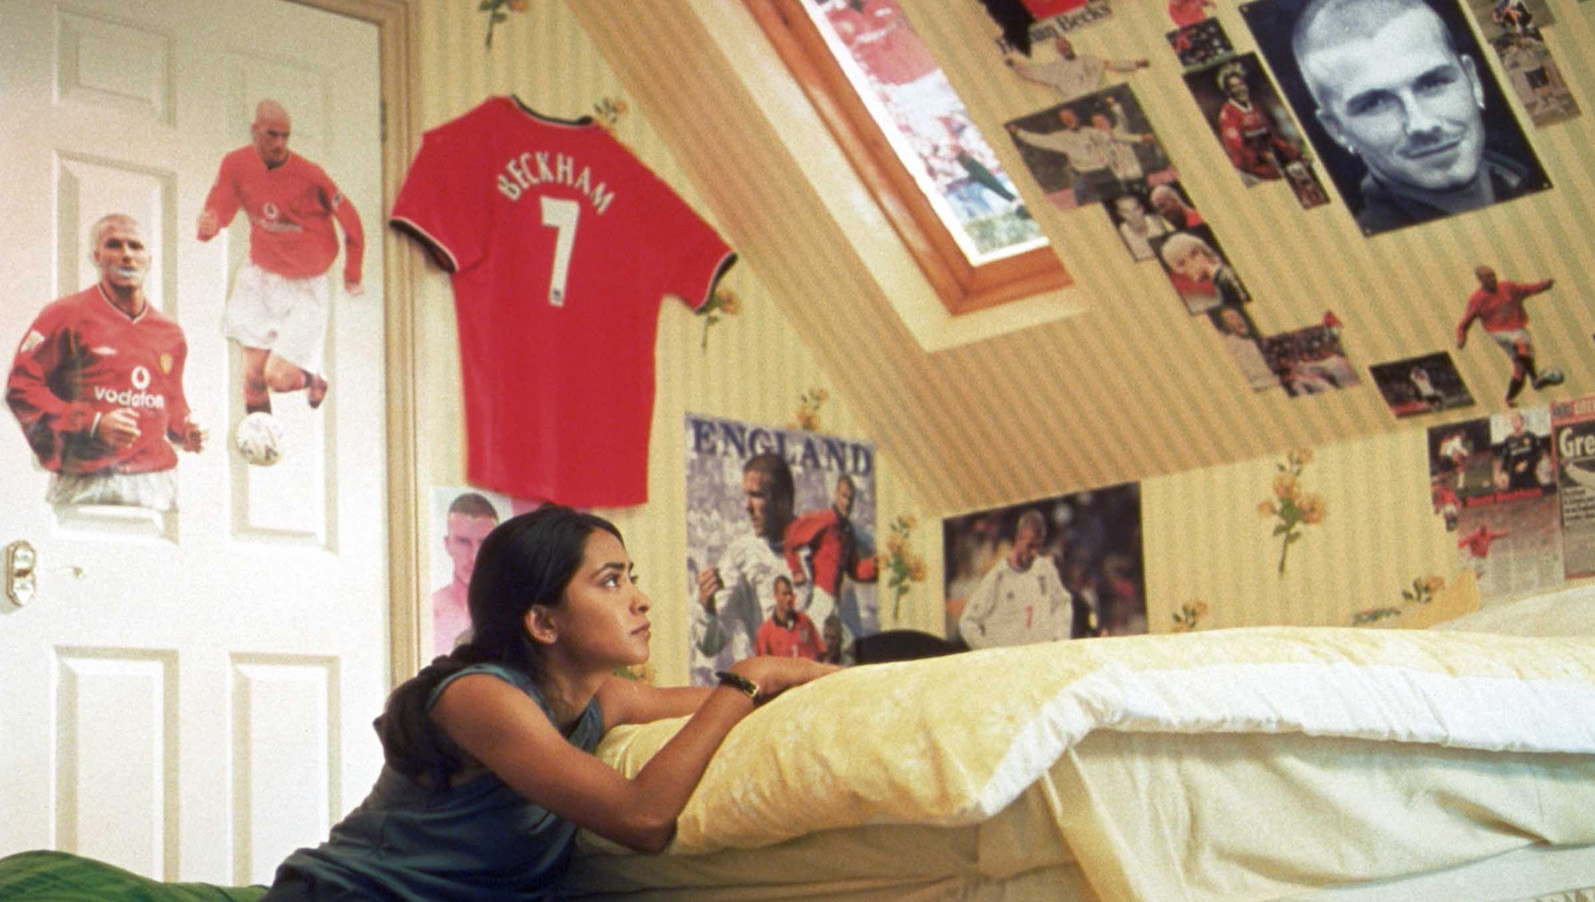 A young girl kneels by her bed and looks up at a photo of David Beckham, with images of soccer players all over her wall